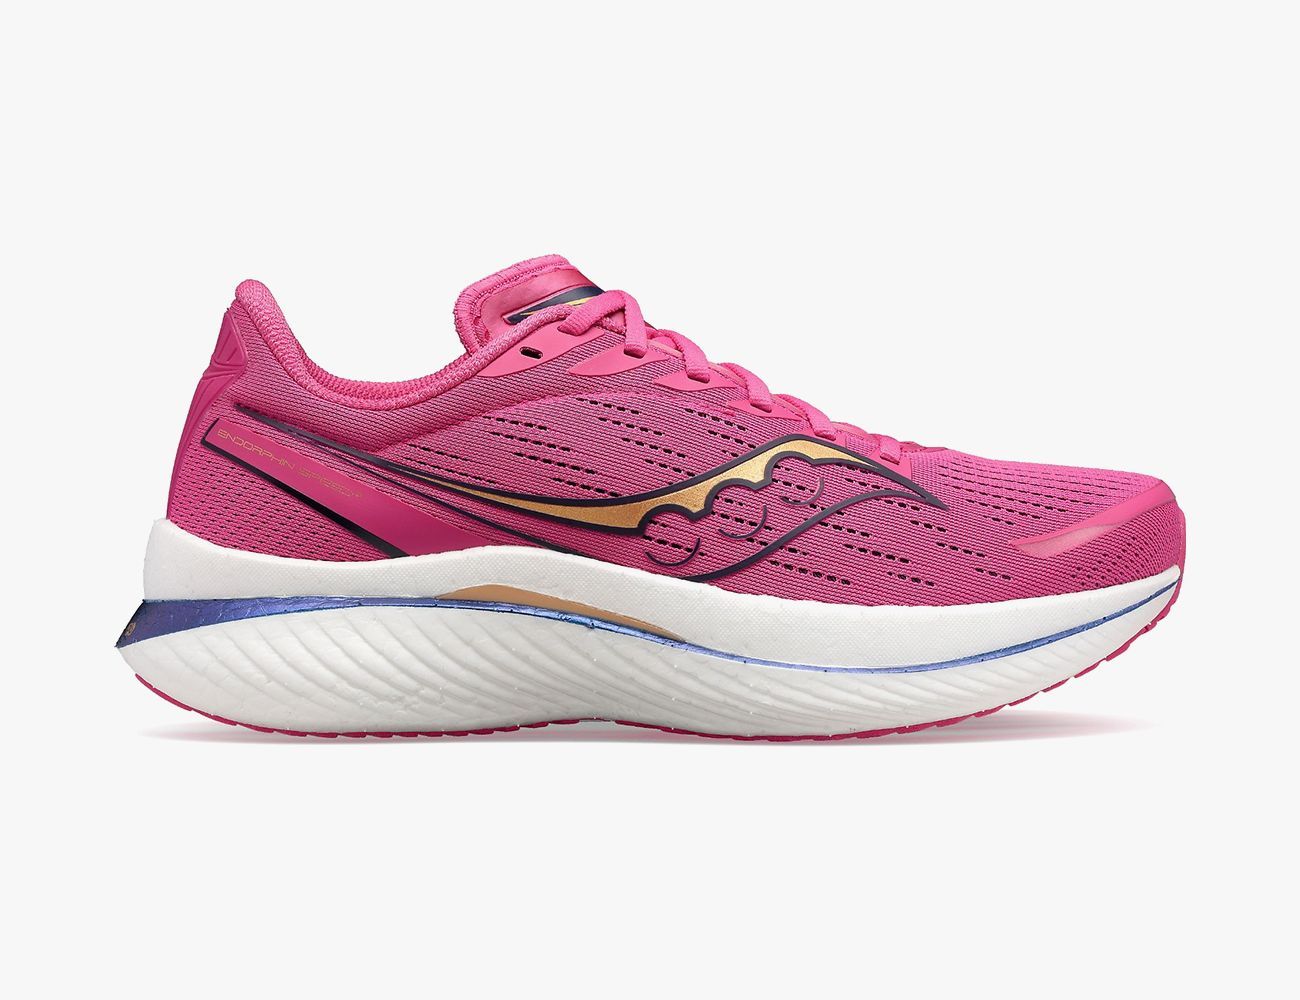 The Best Cushioned Running Shoes for Plush Pacing